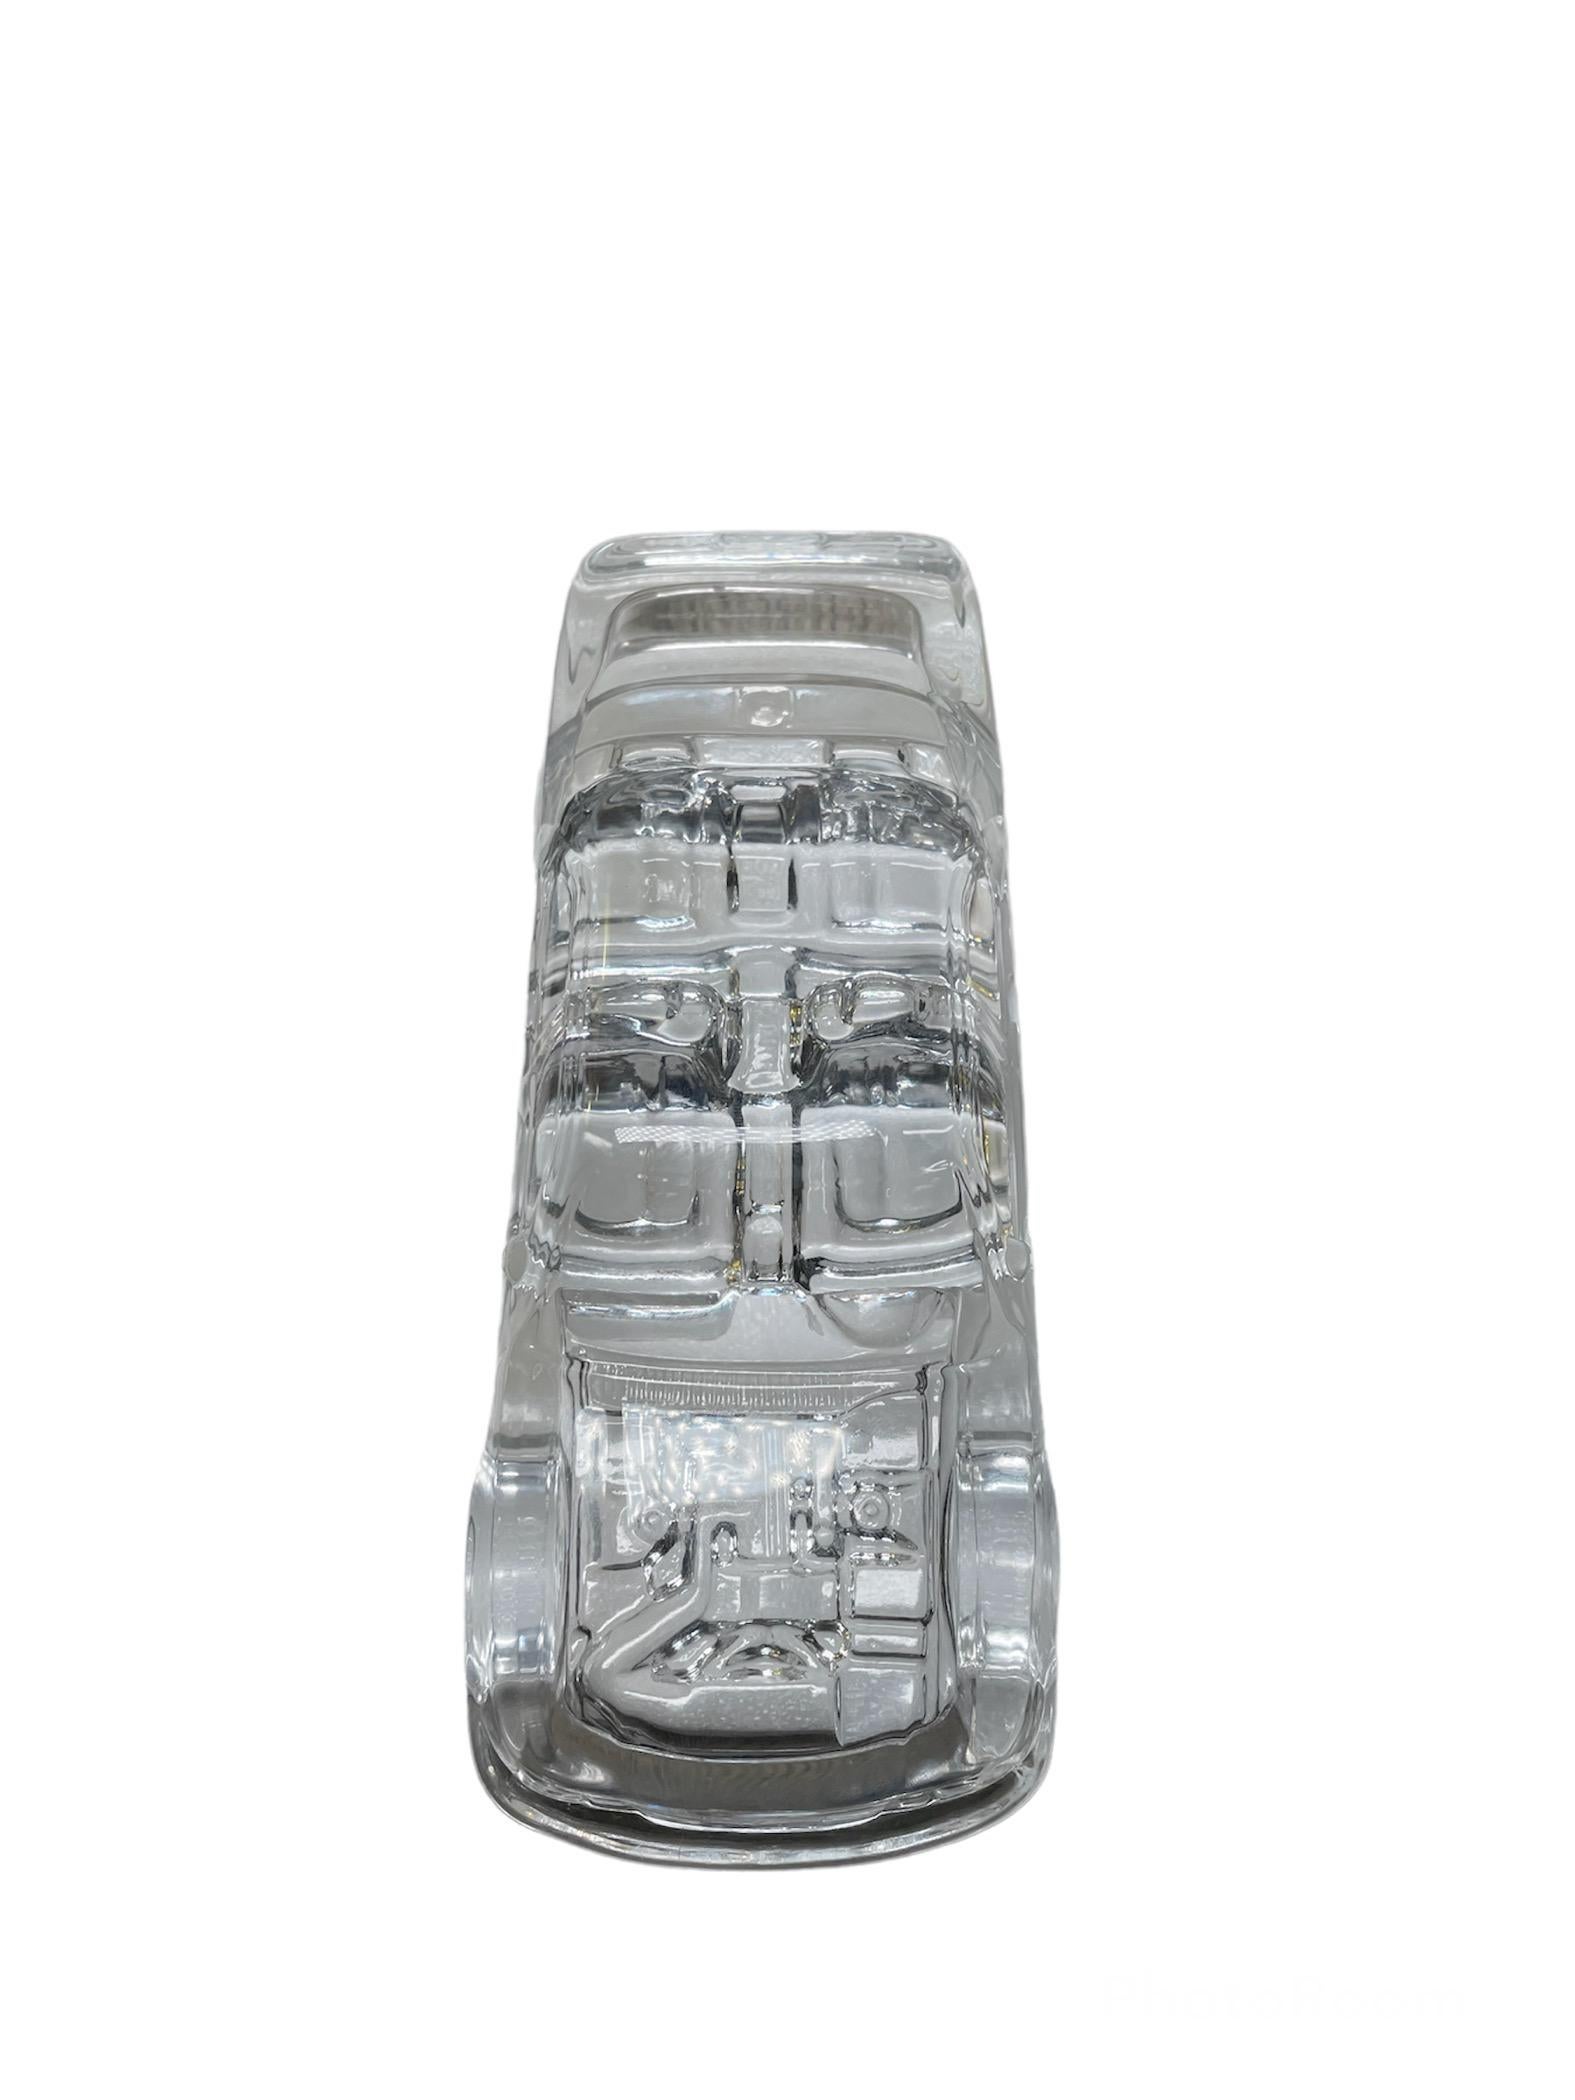 1989-90’s Clear Crystal Lexus LS 400 Car Paperweight For Sale 4